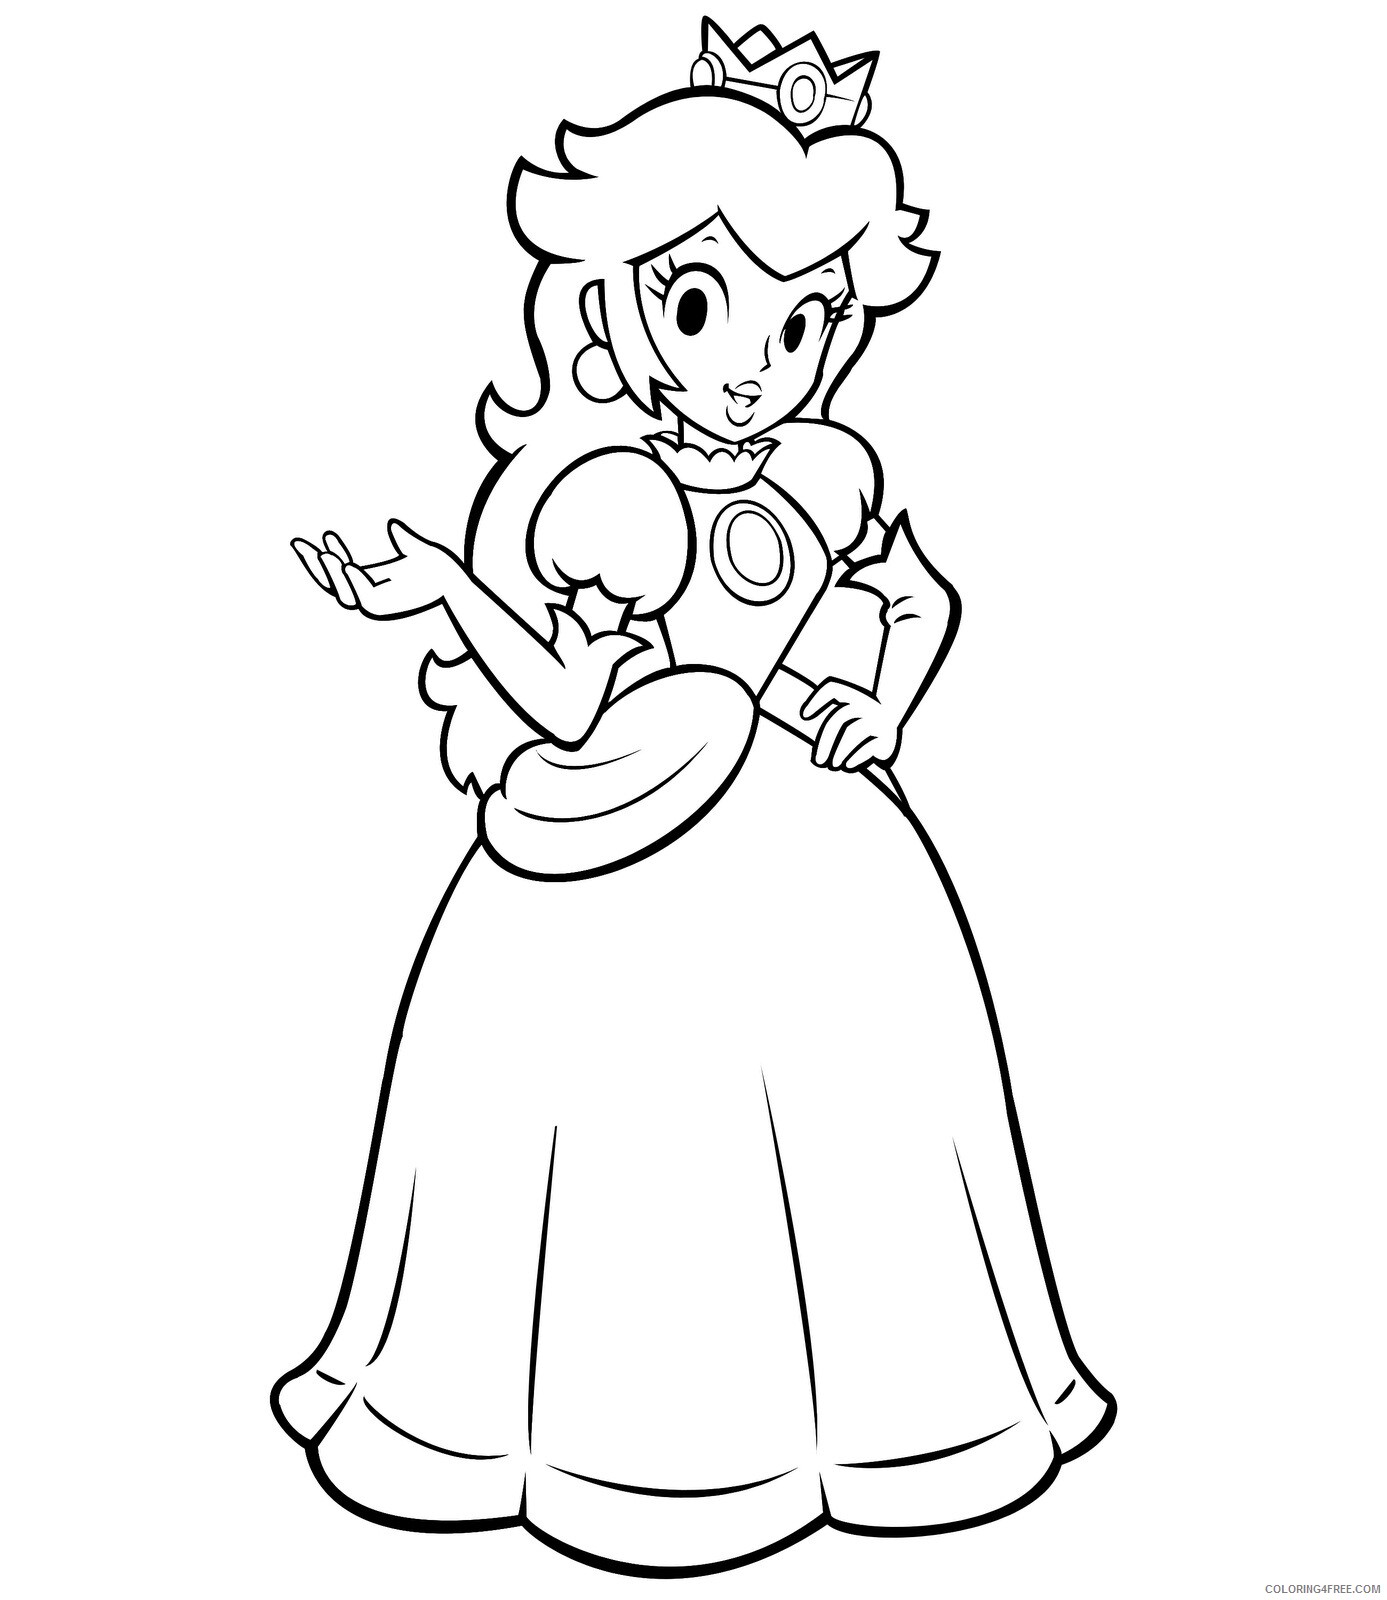 Princess Coloring Pages for Girls Princess Peach Printable 2021 1133 Coloring4free